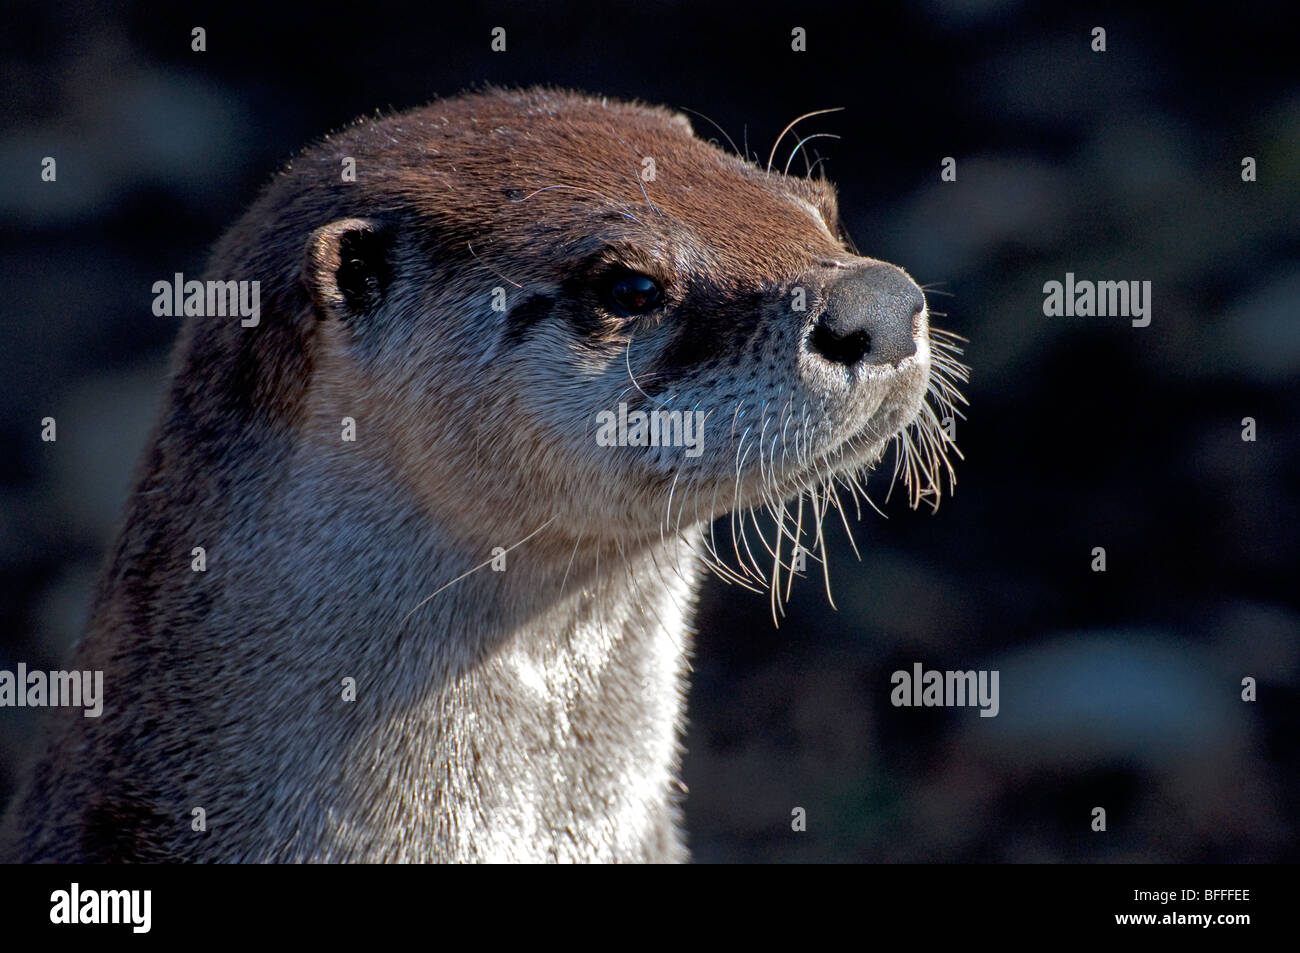 A Close-up of a Northern River Otter Stock Photo